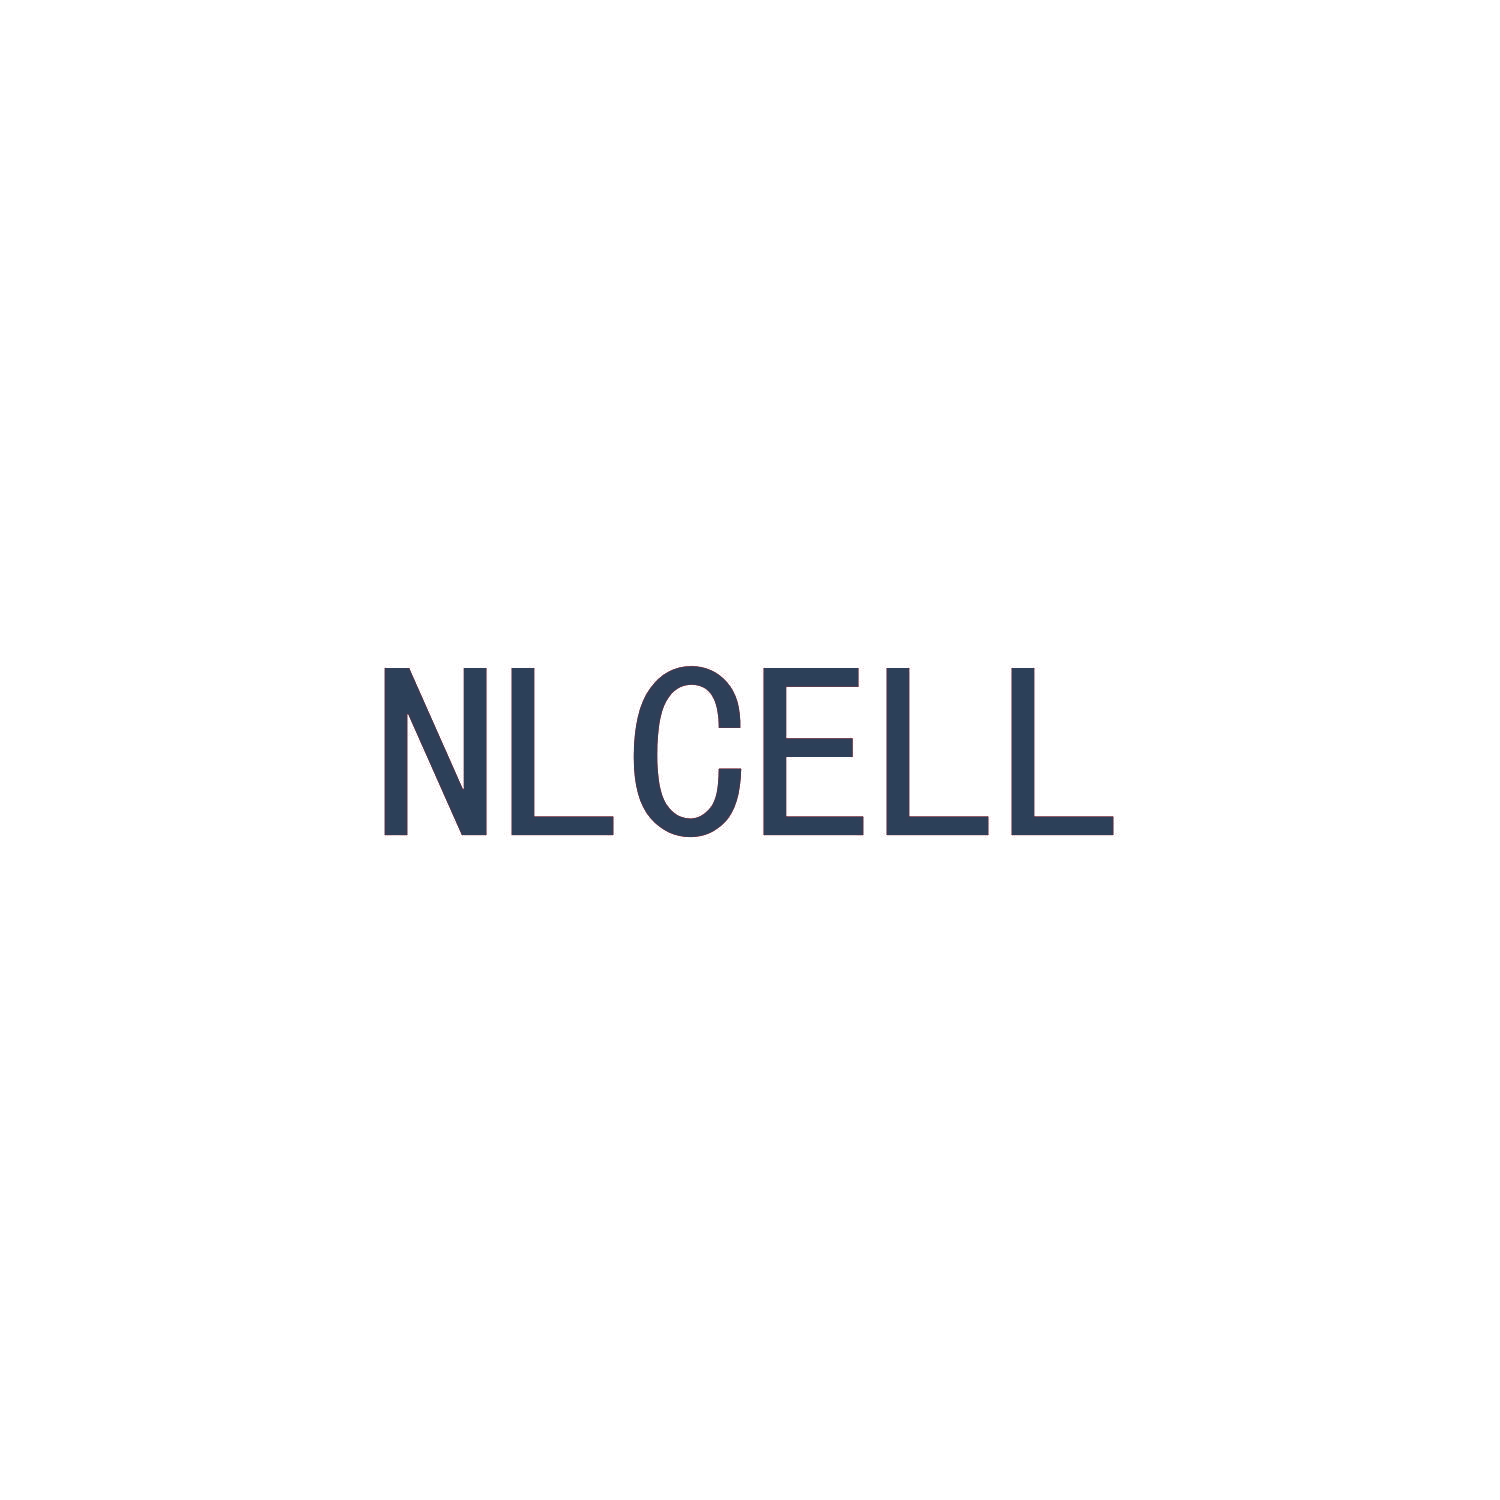 NLCELL